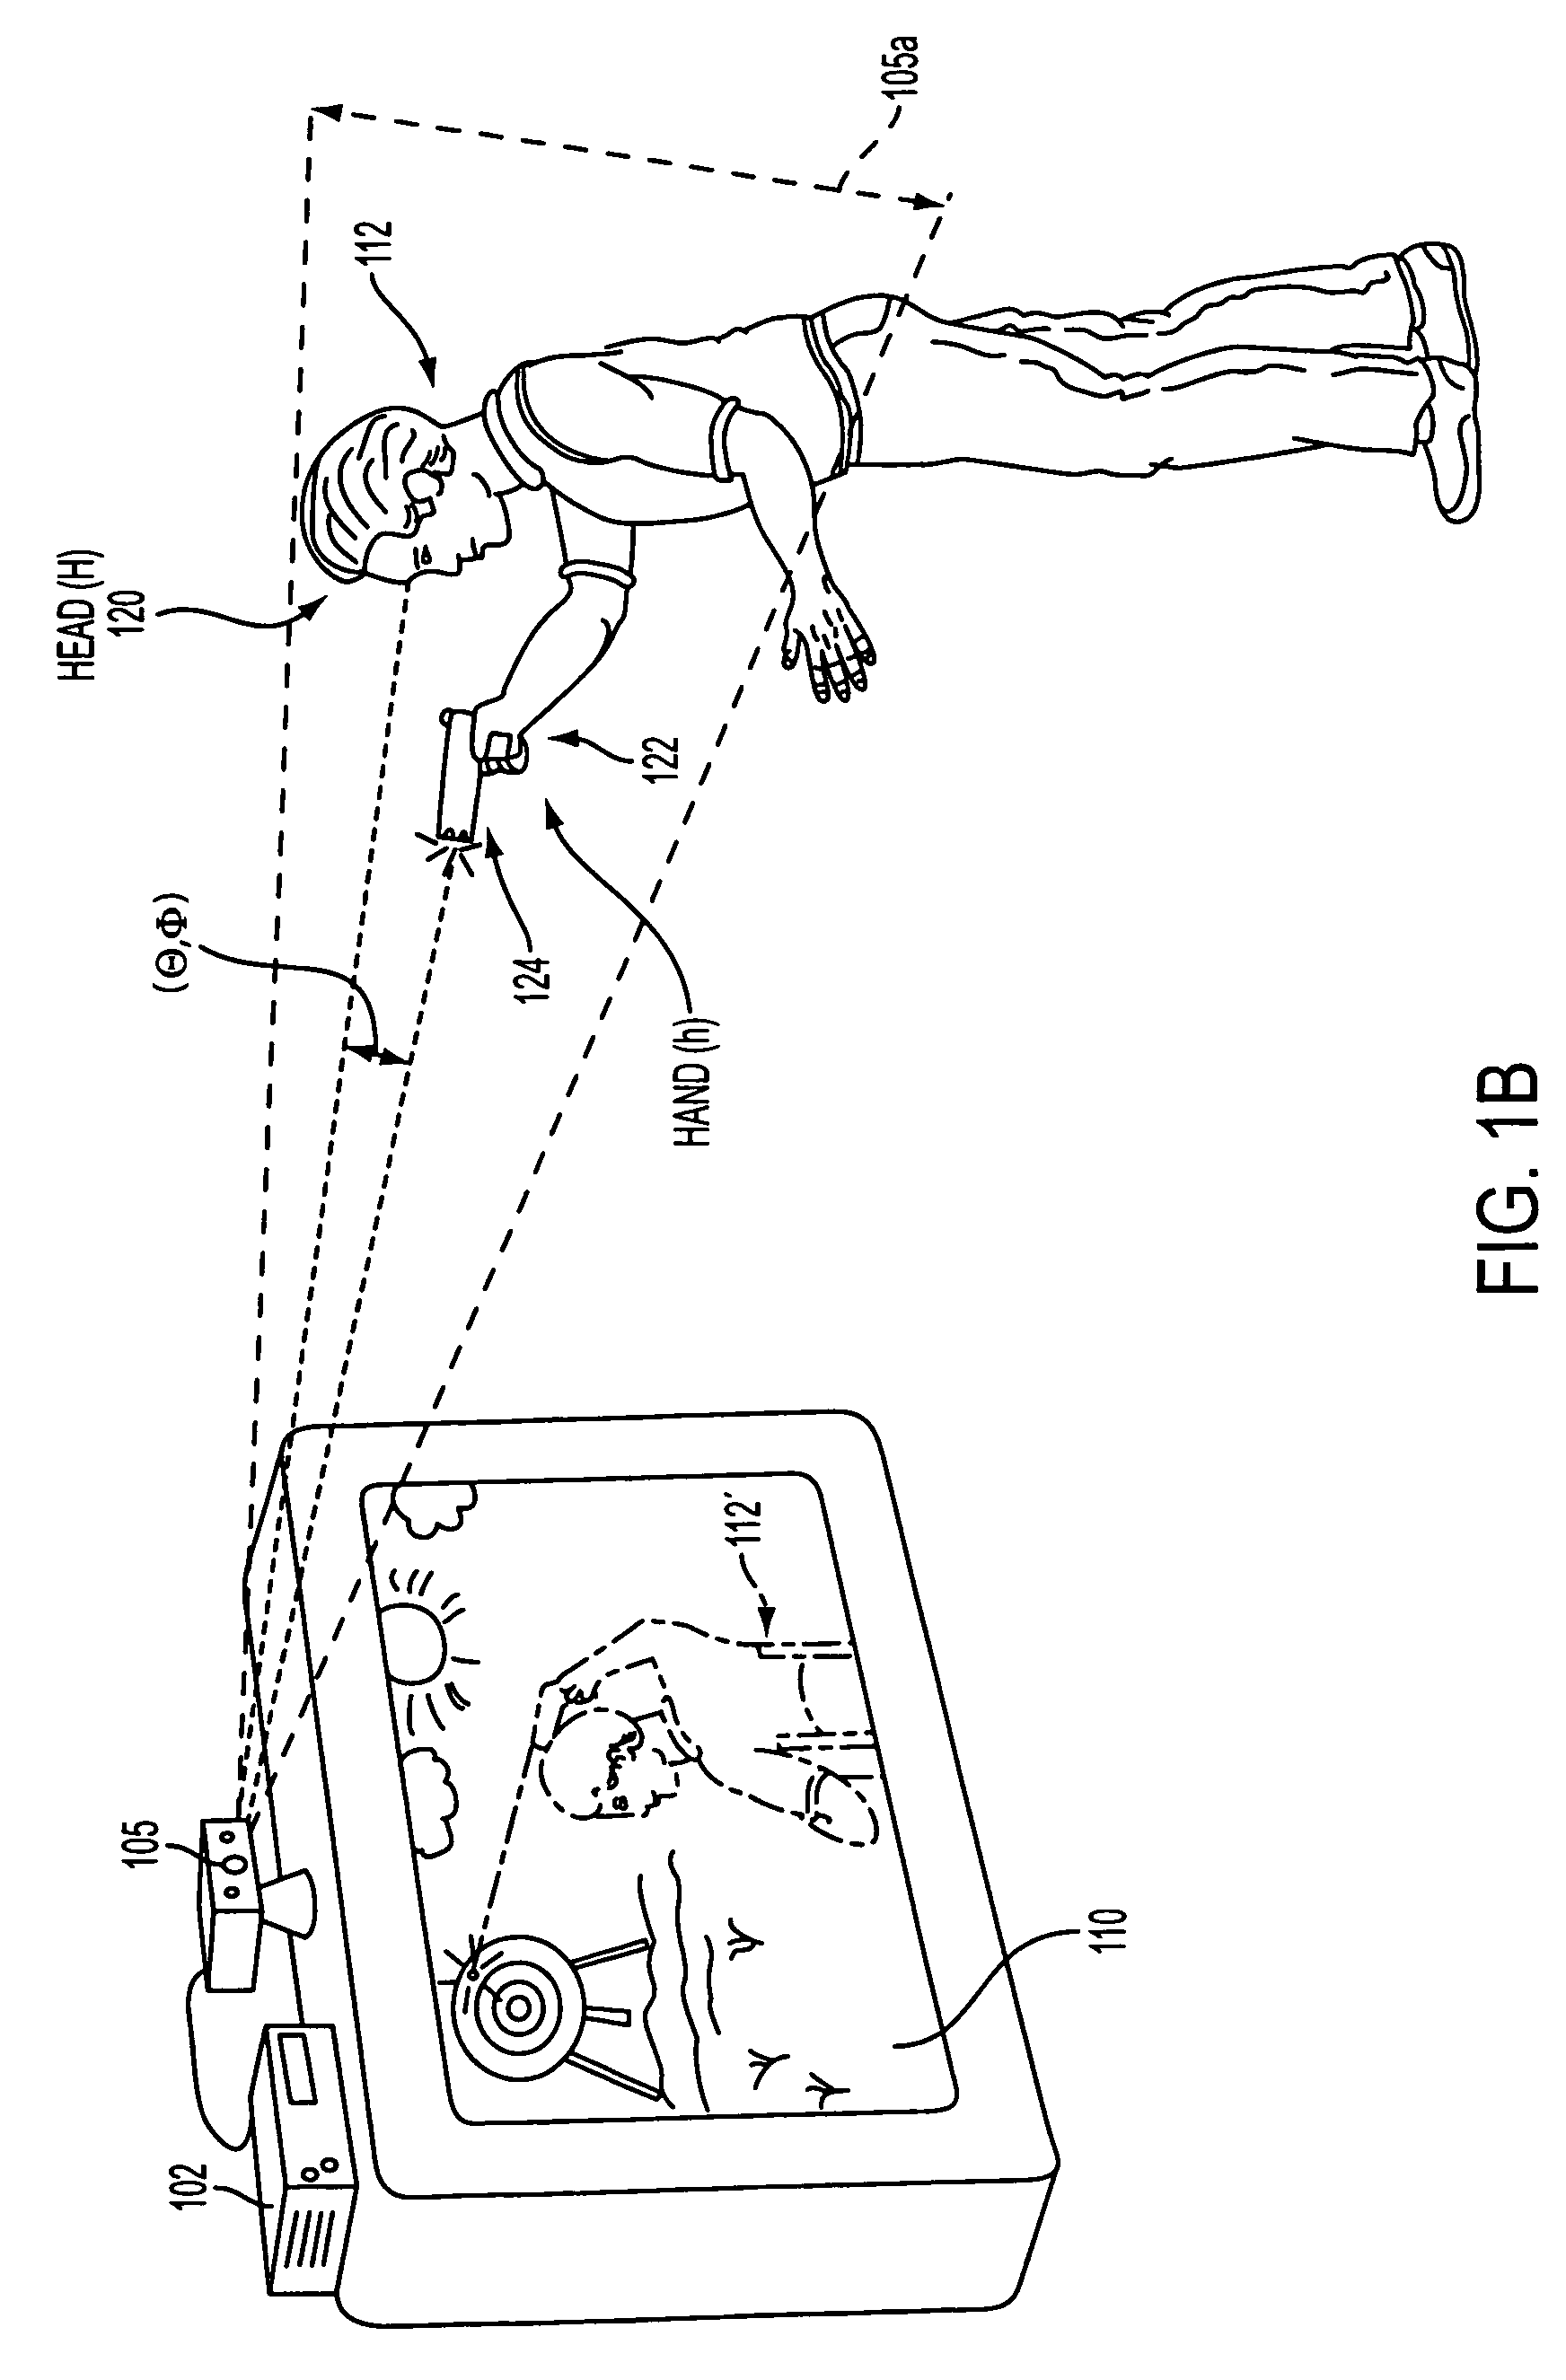 Methods and systems for enabling direction detection when interfacing with a computer program